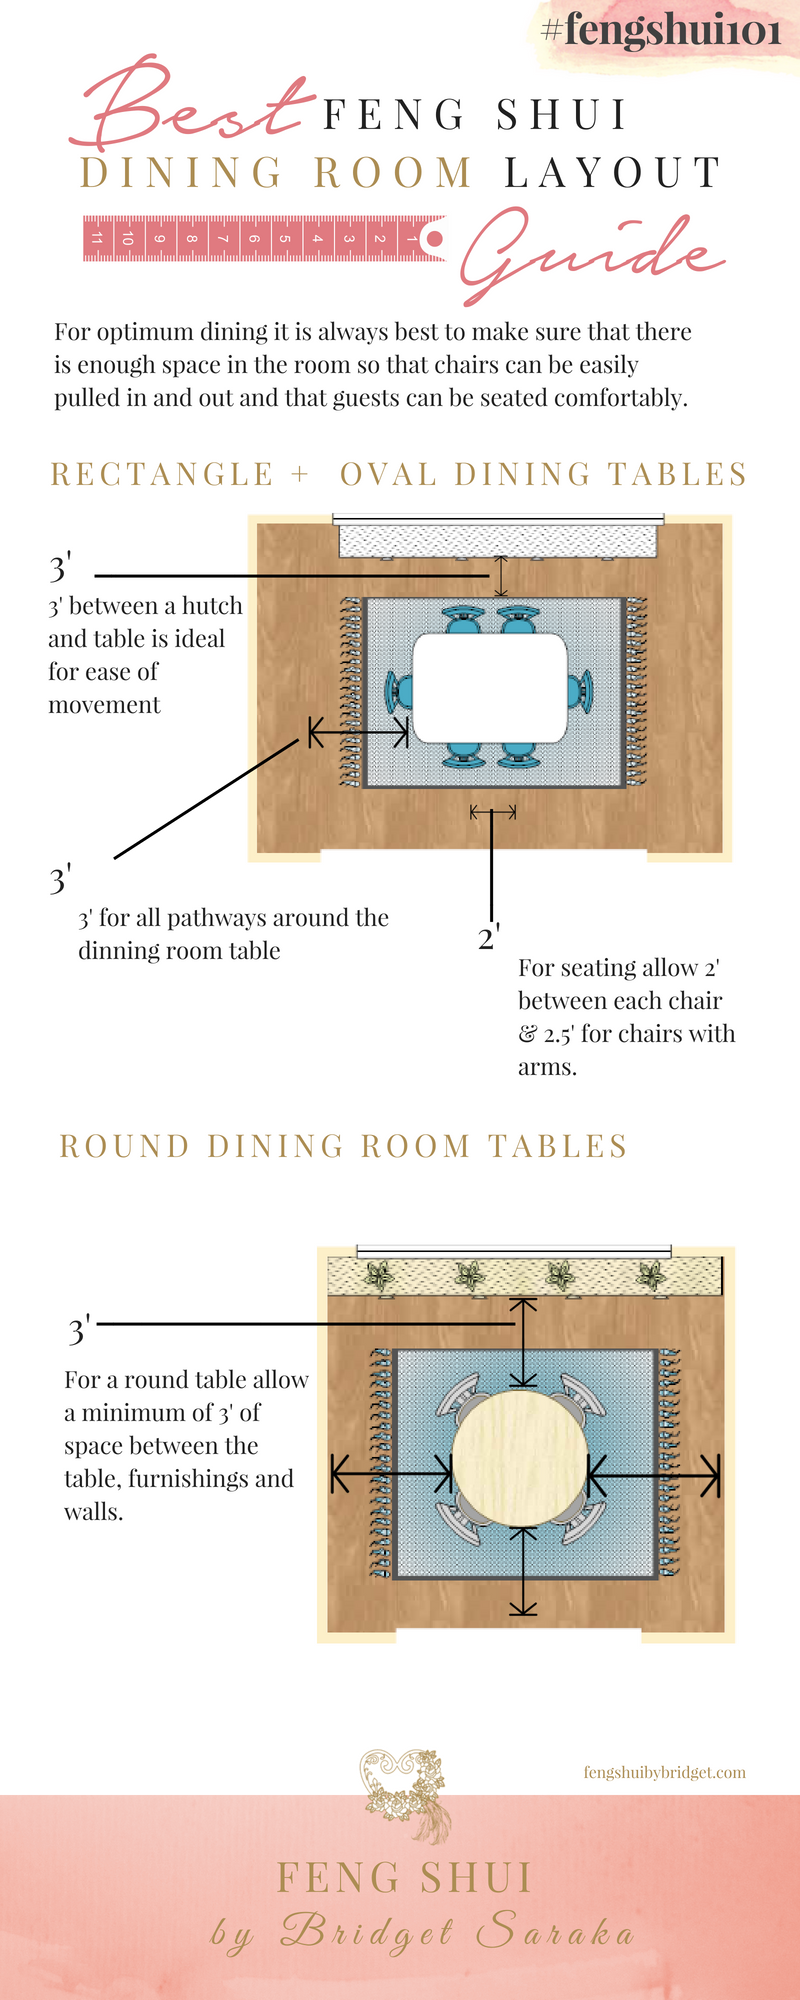 Dining Room Furniture Layout Feng Shui By Bridget